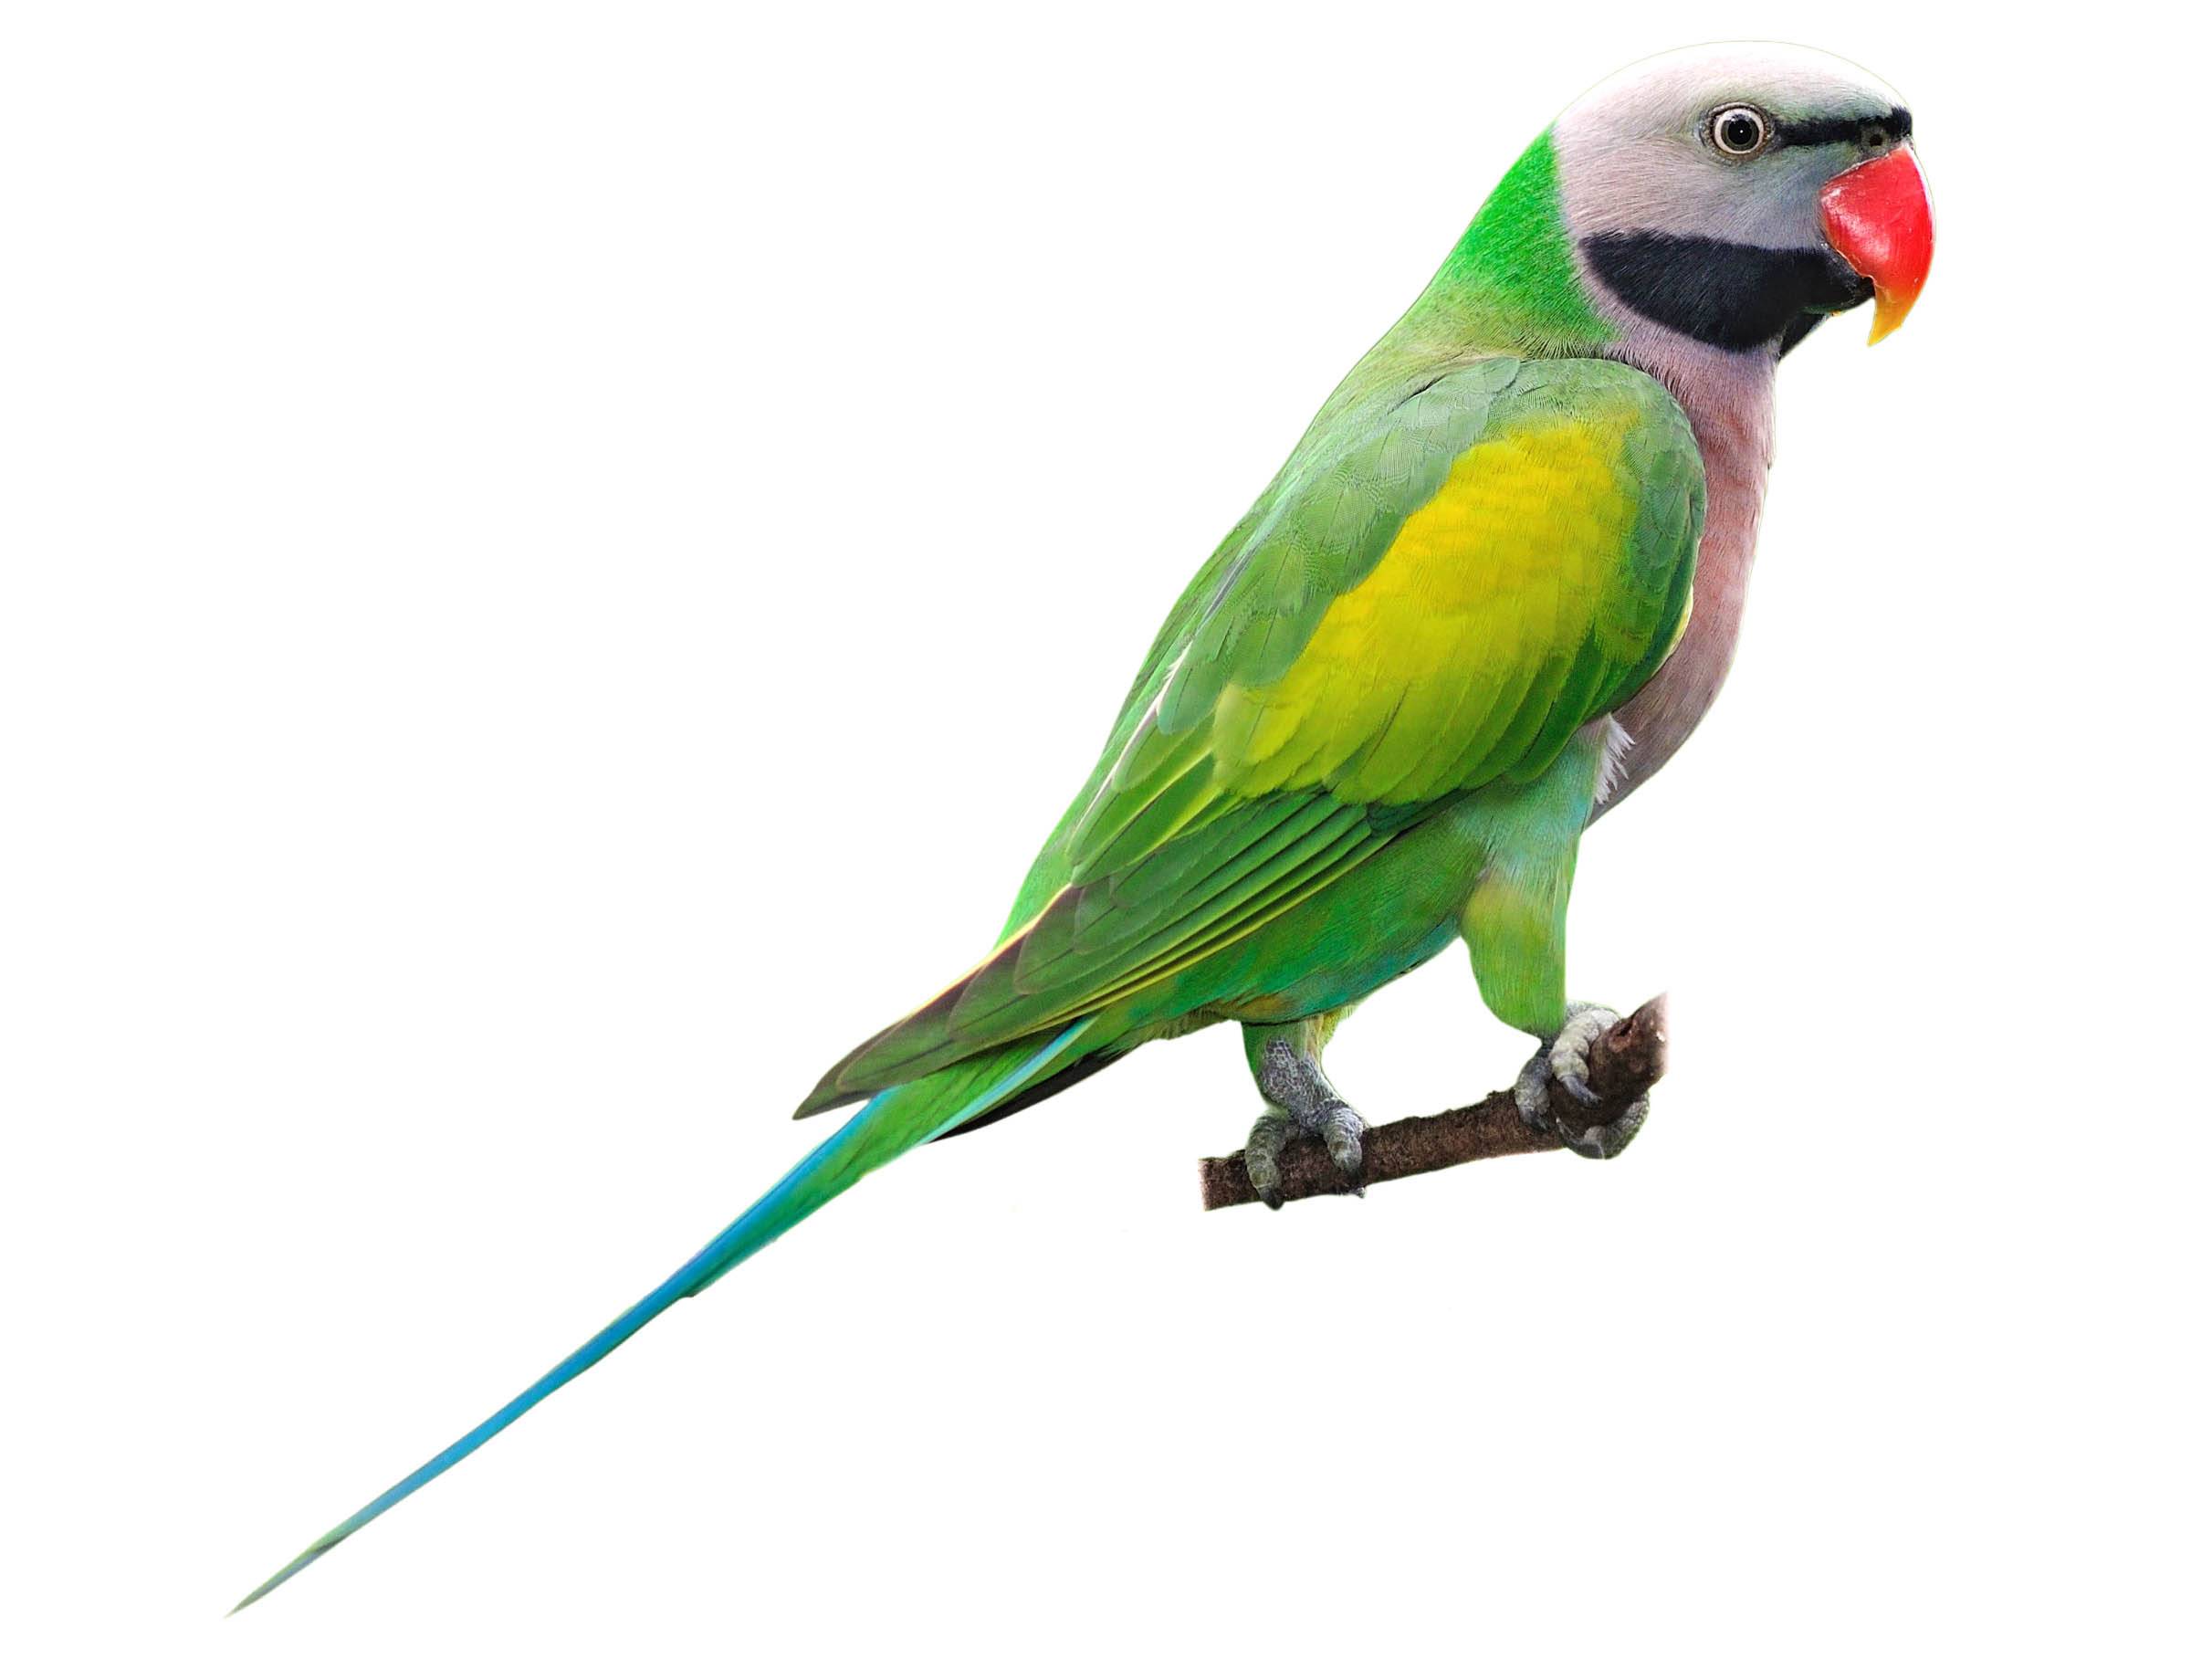 A photo of a Red-breasted Parakeet (Psittacula alexandri), male